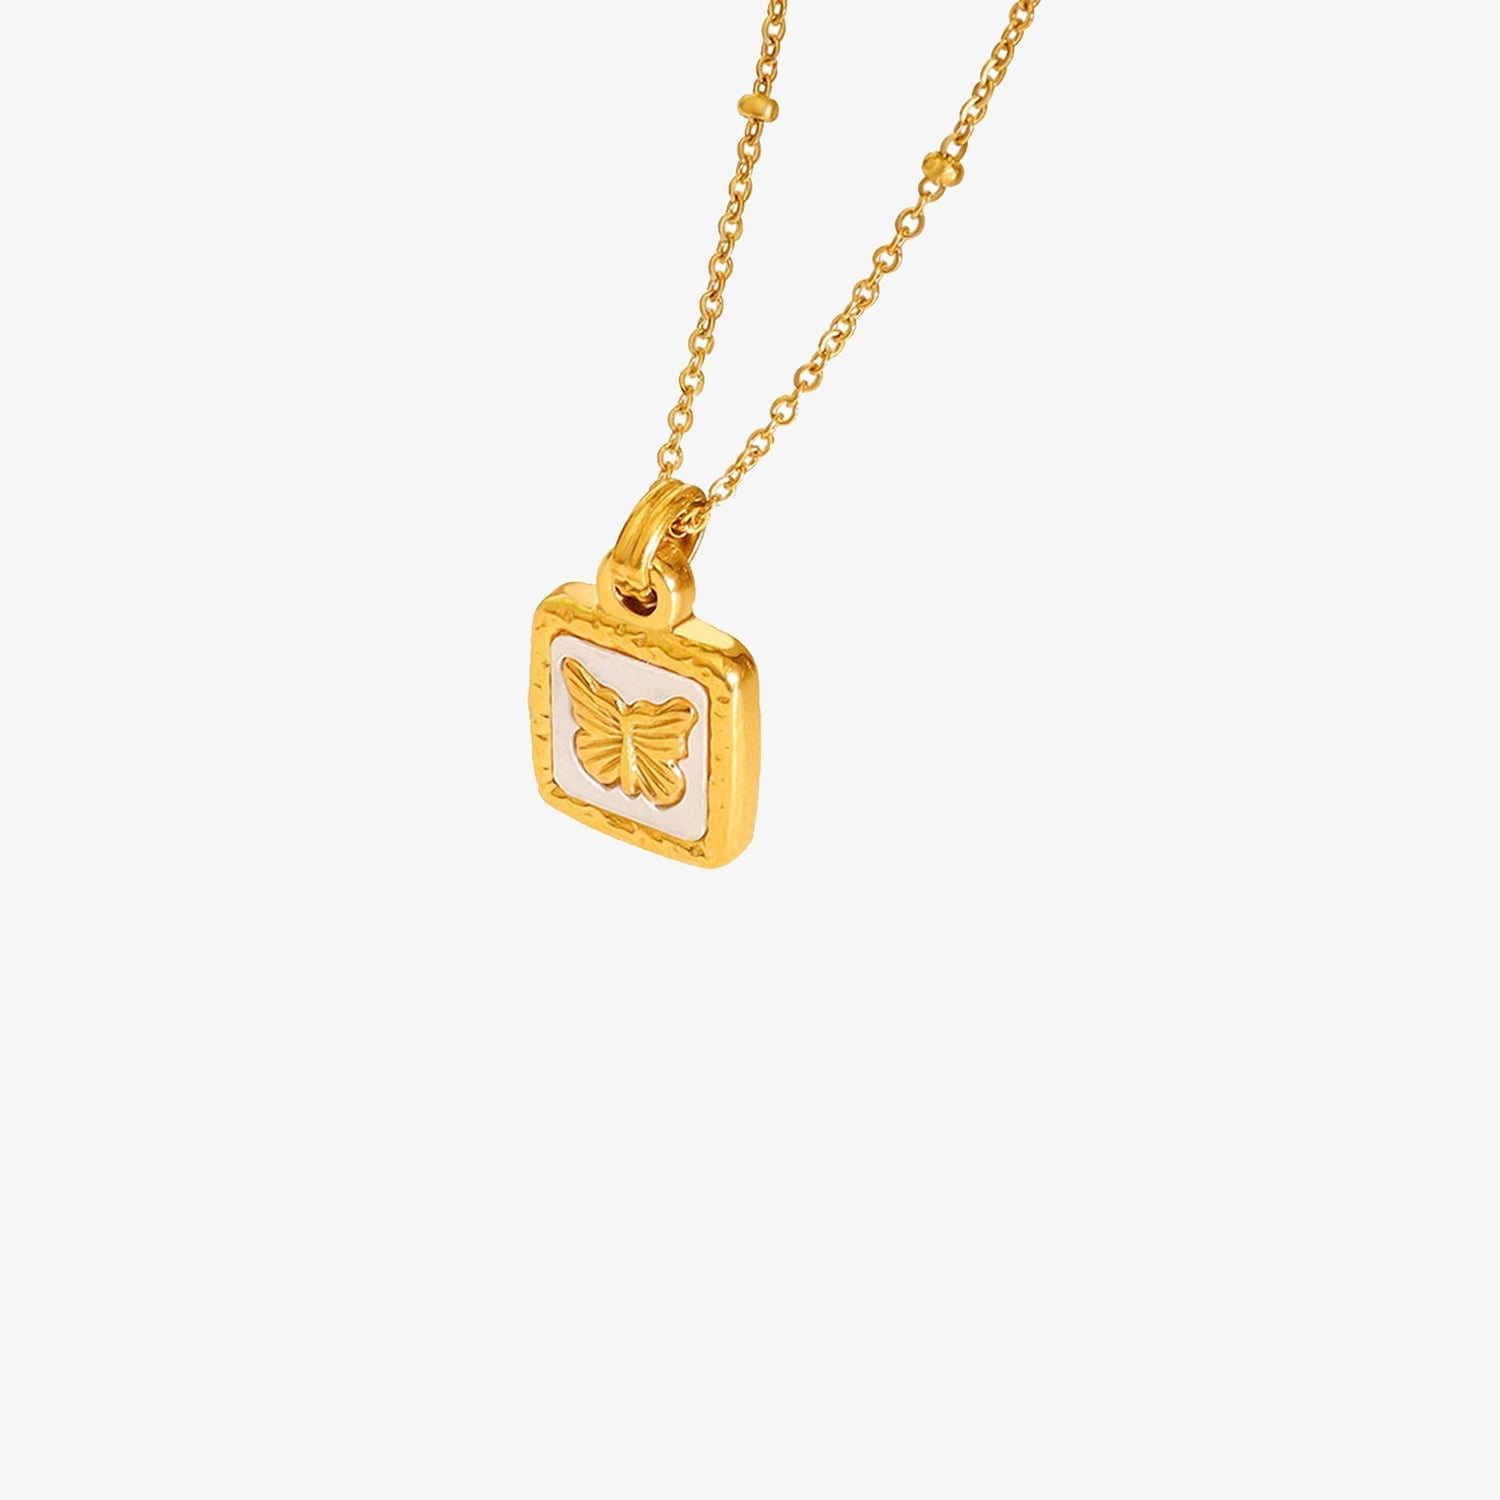 Butterfly Square Pendant NecklaceNecklaceBeach Rose Co.